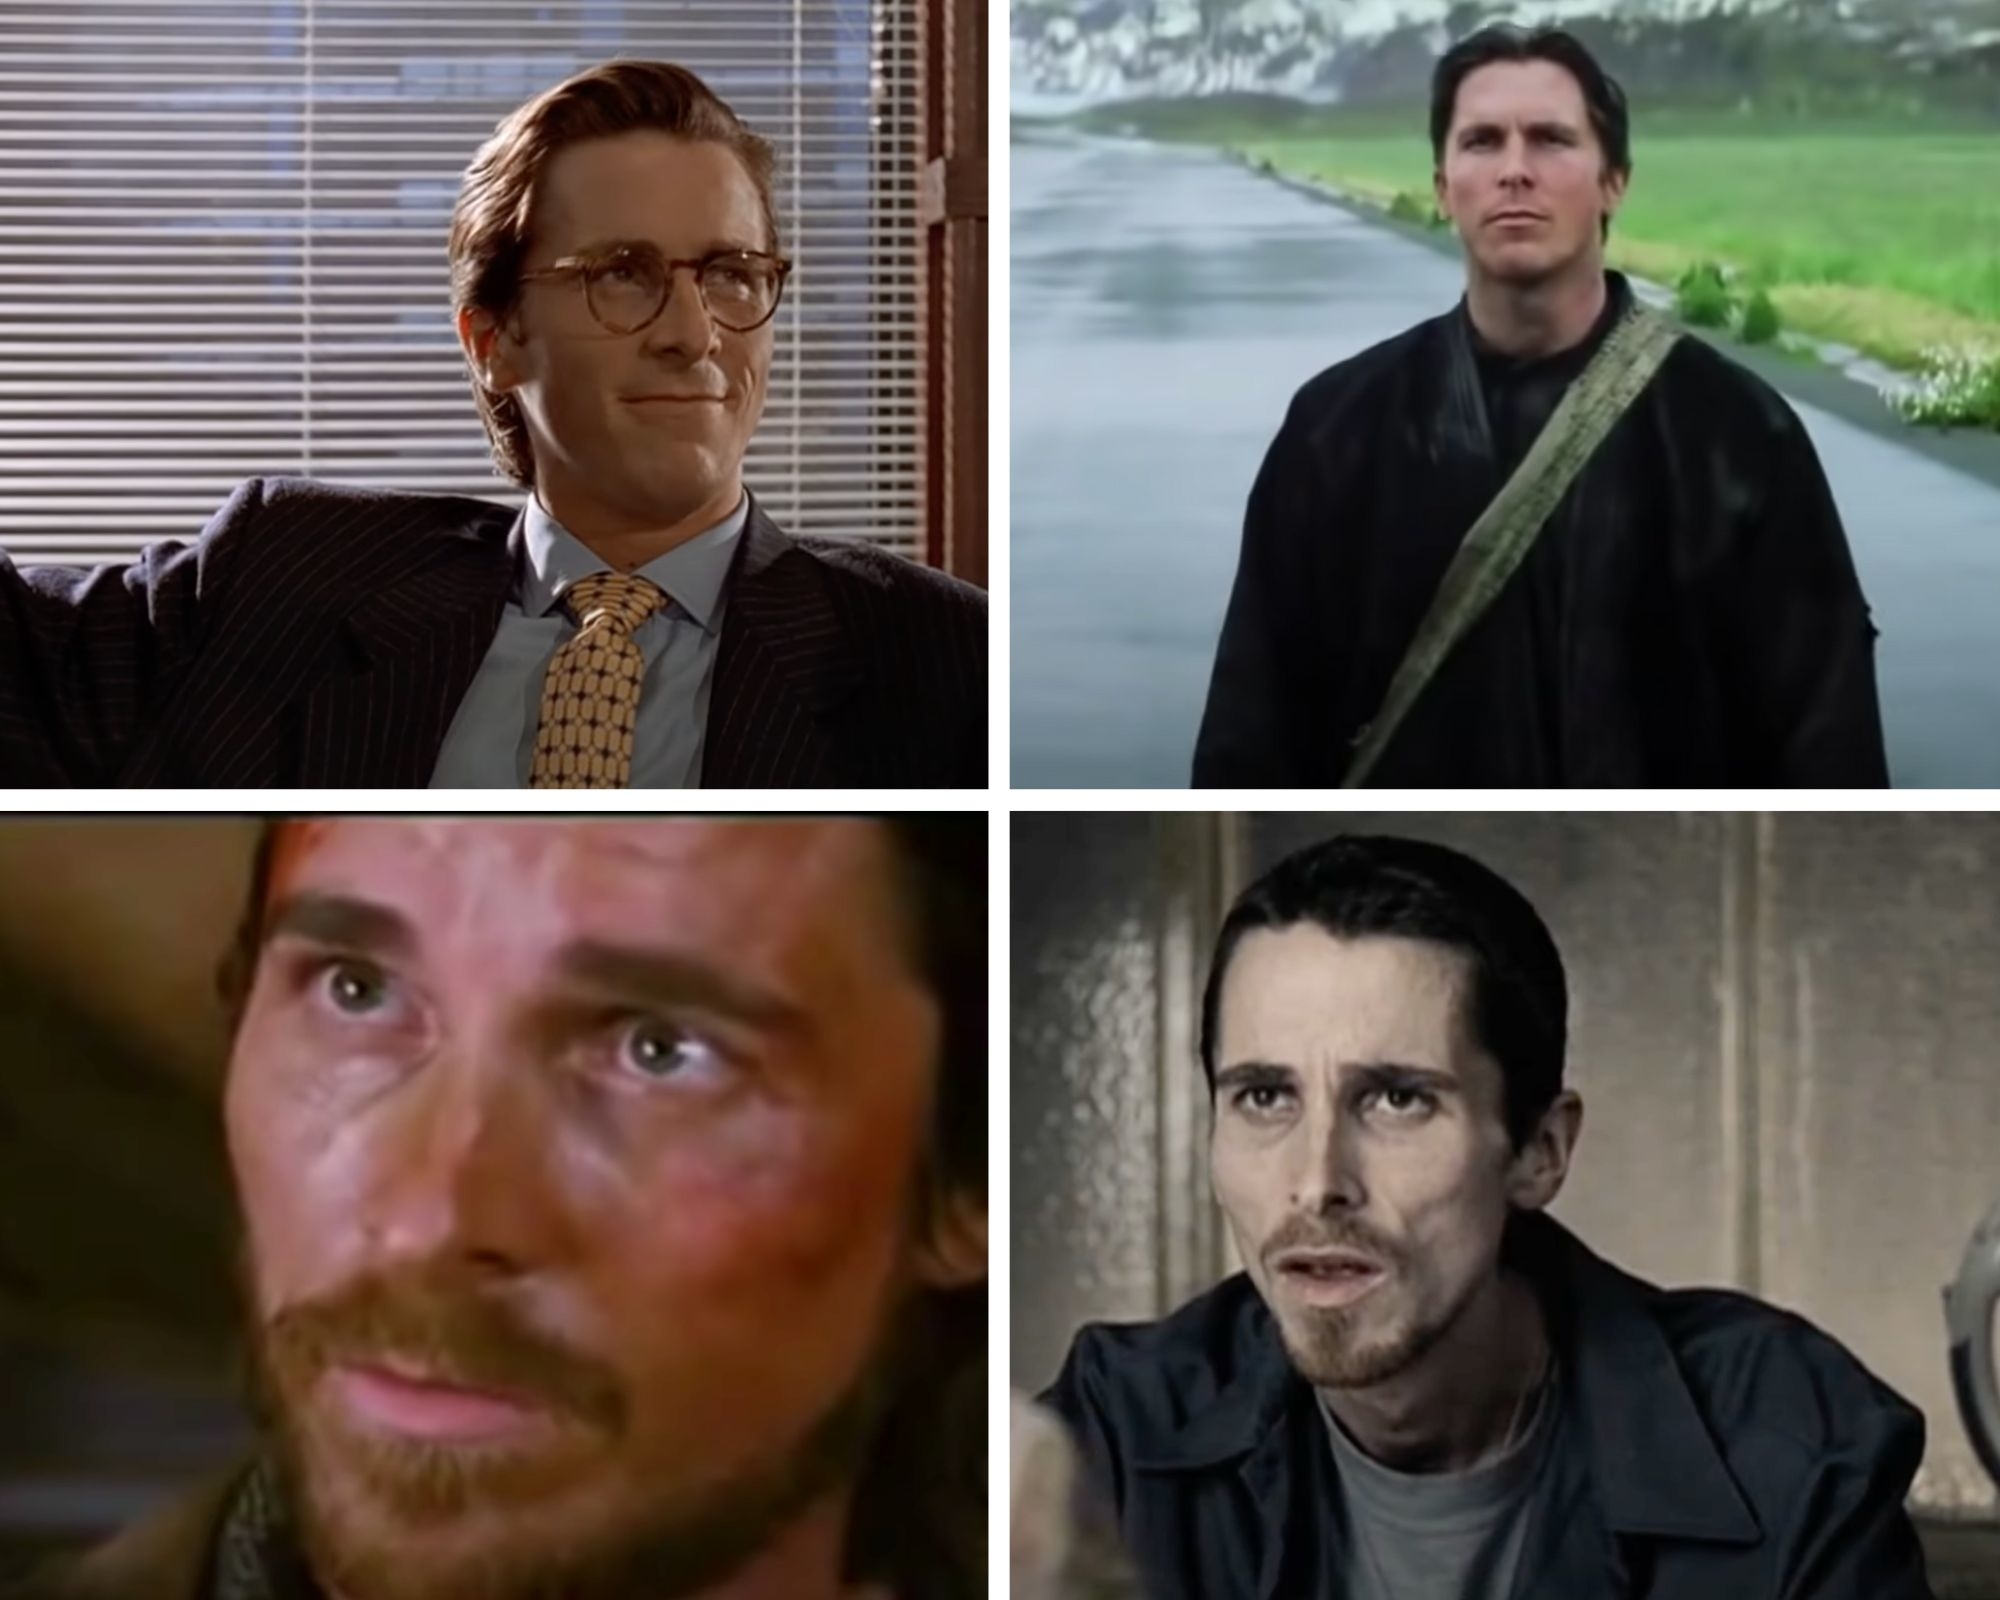 Christian Bale in American Psycho, Batman Beings, 3:10 To Yuma and The Machinist